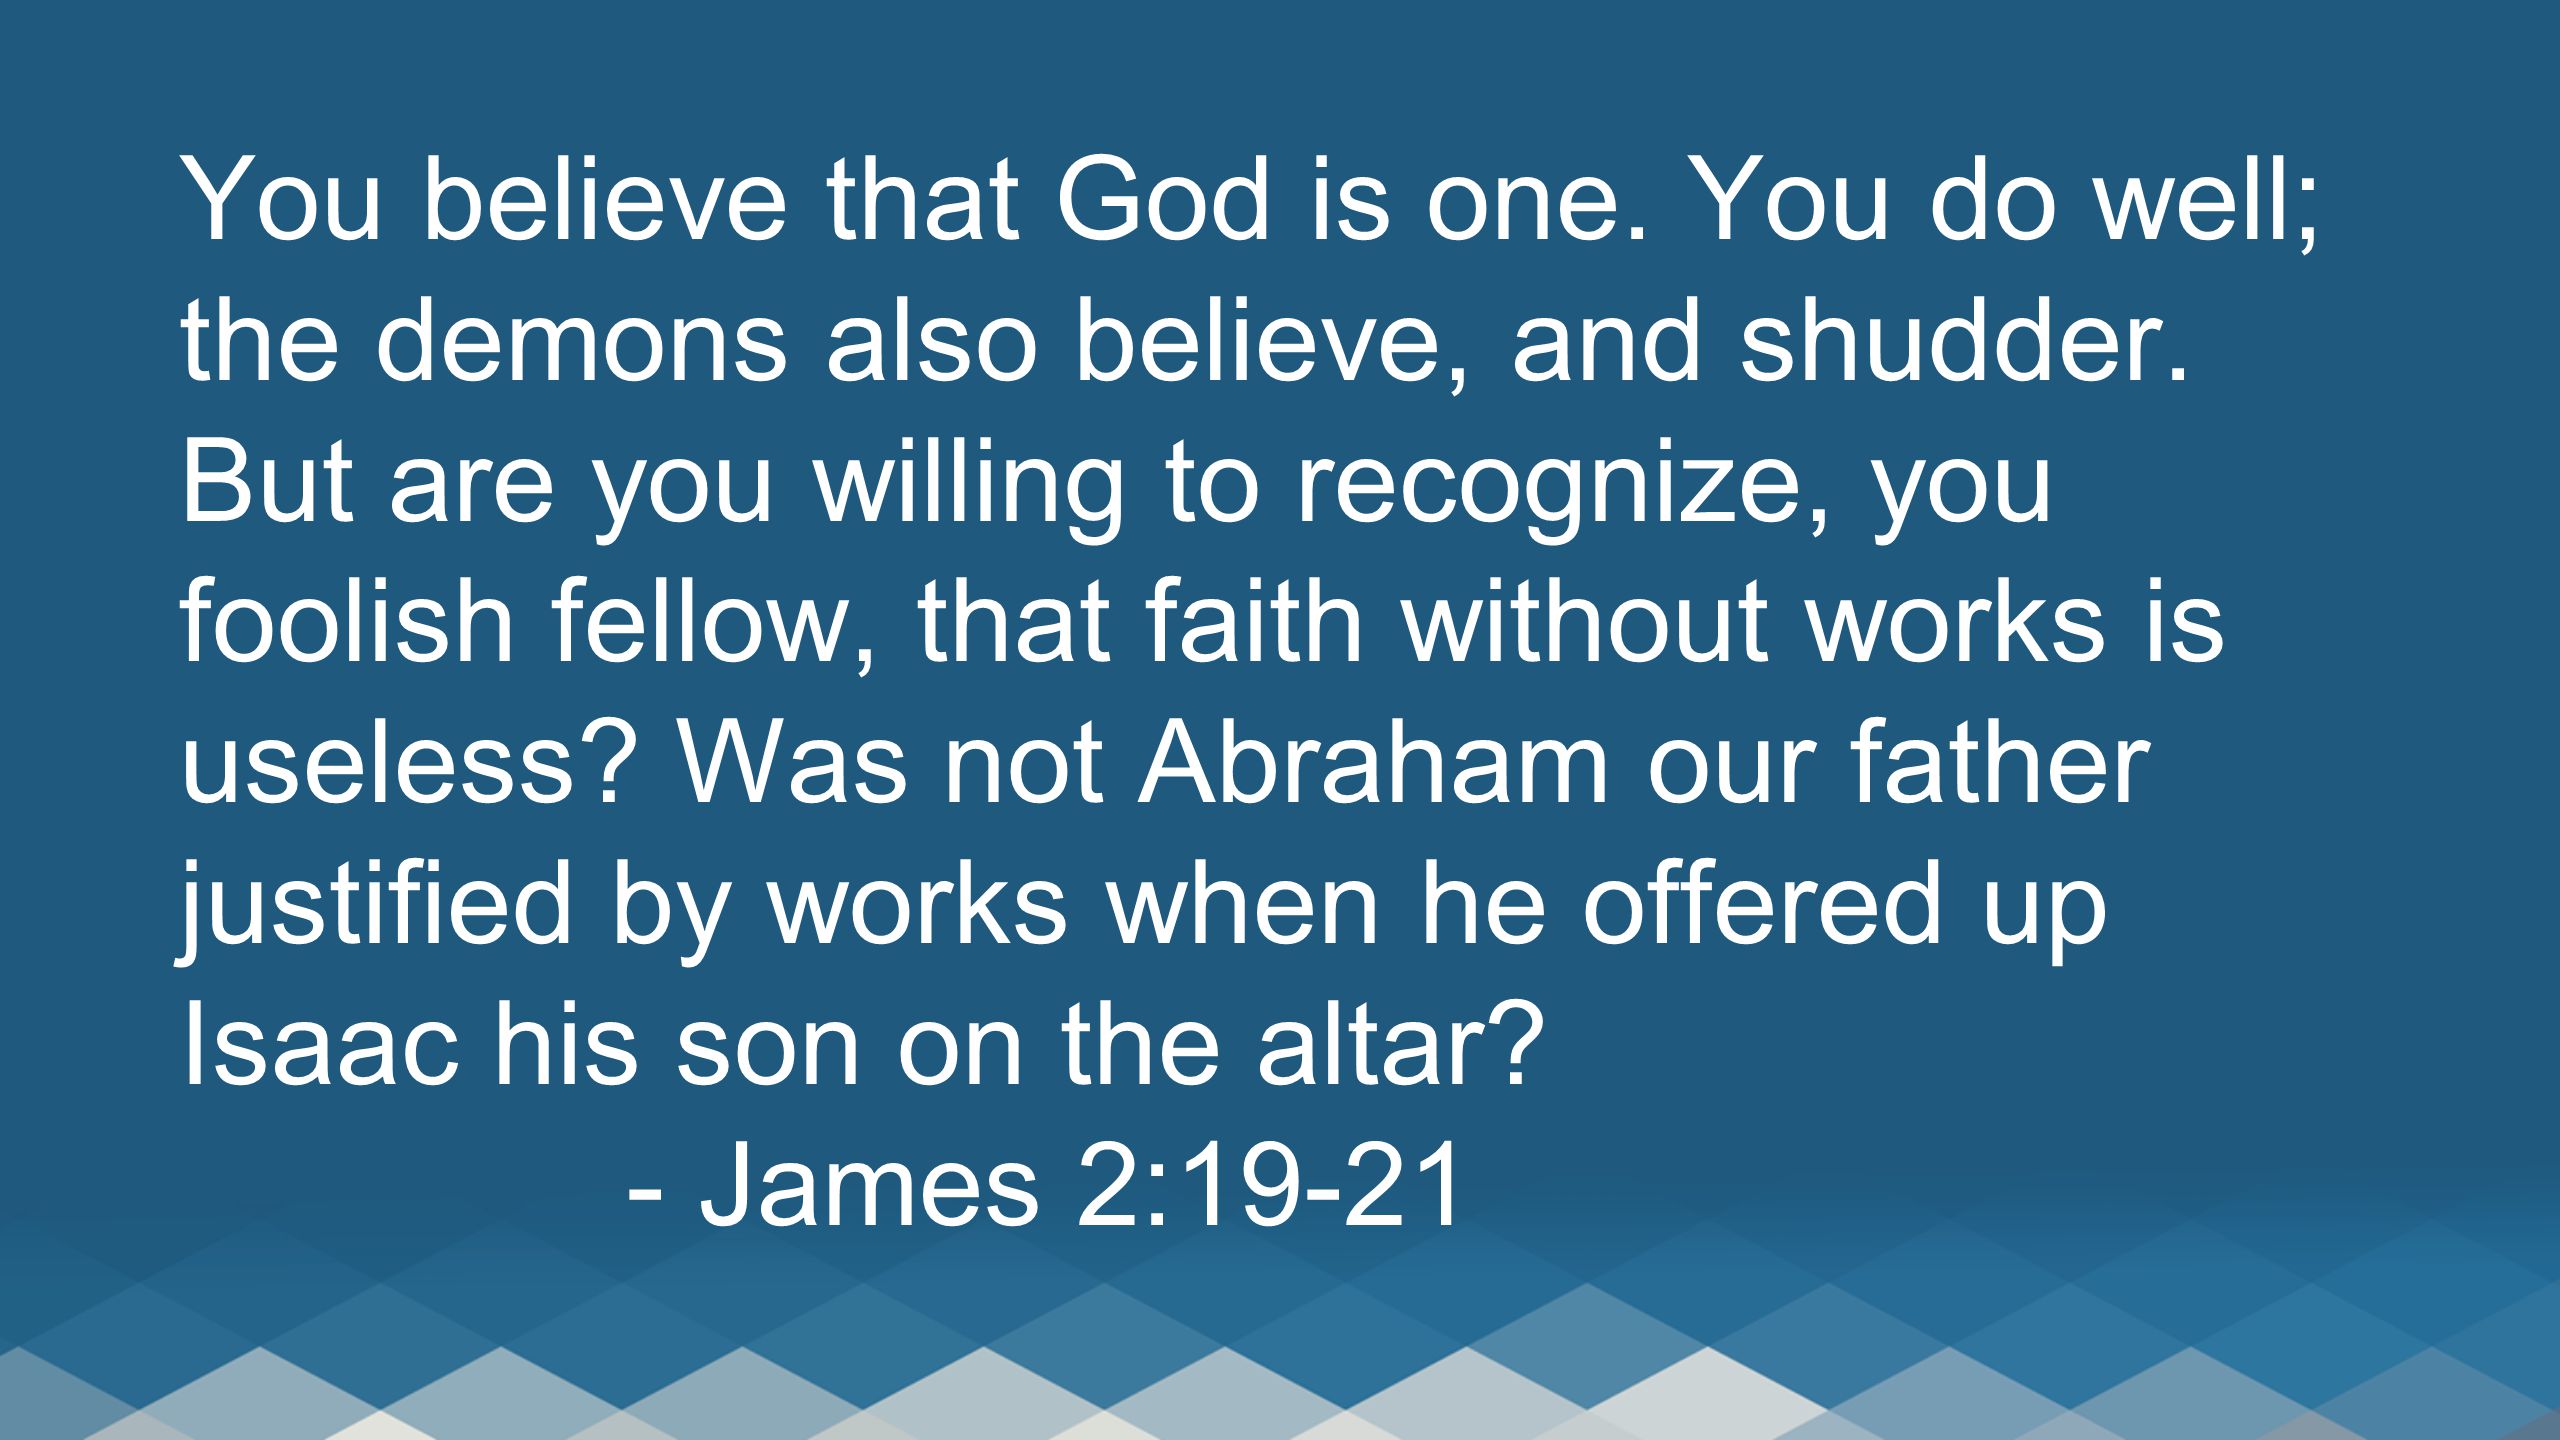 You believe that God is one. You do well; the demons also believe, and shudder.